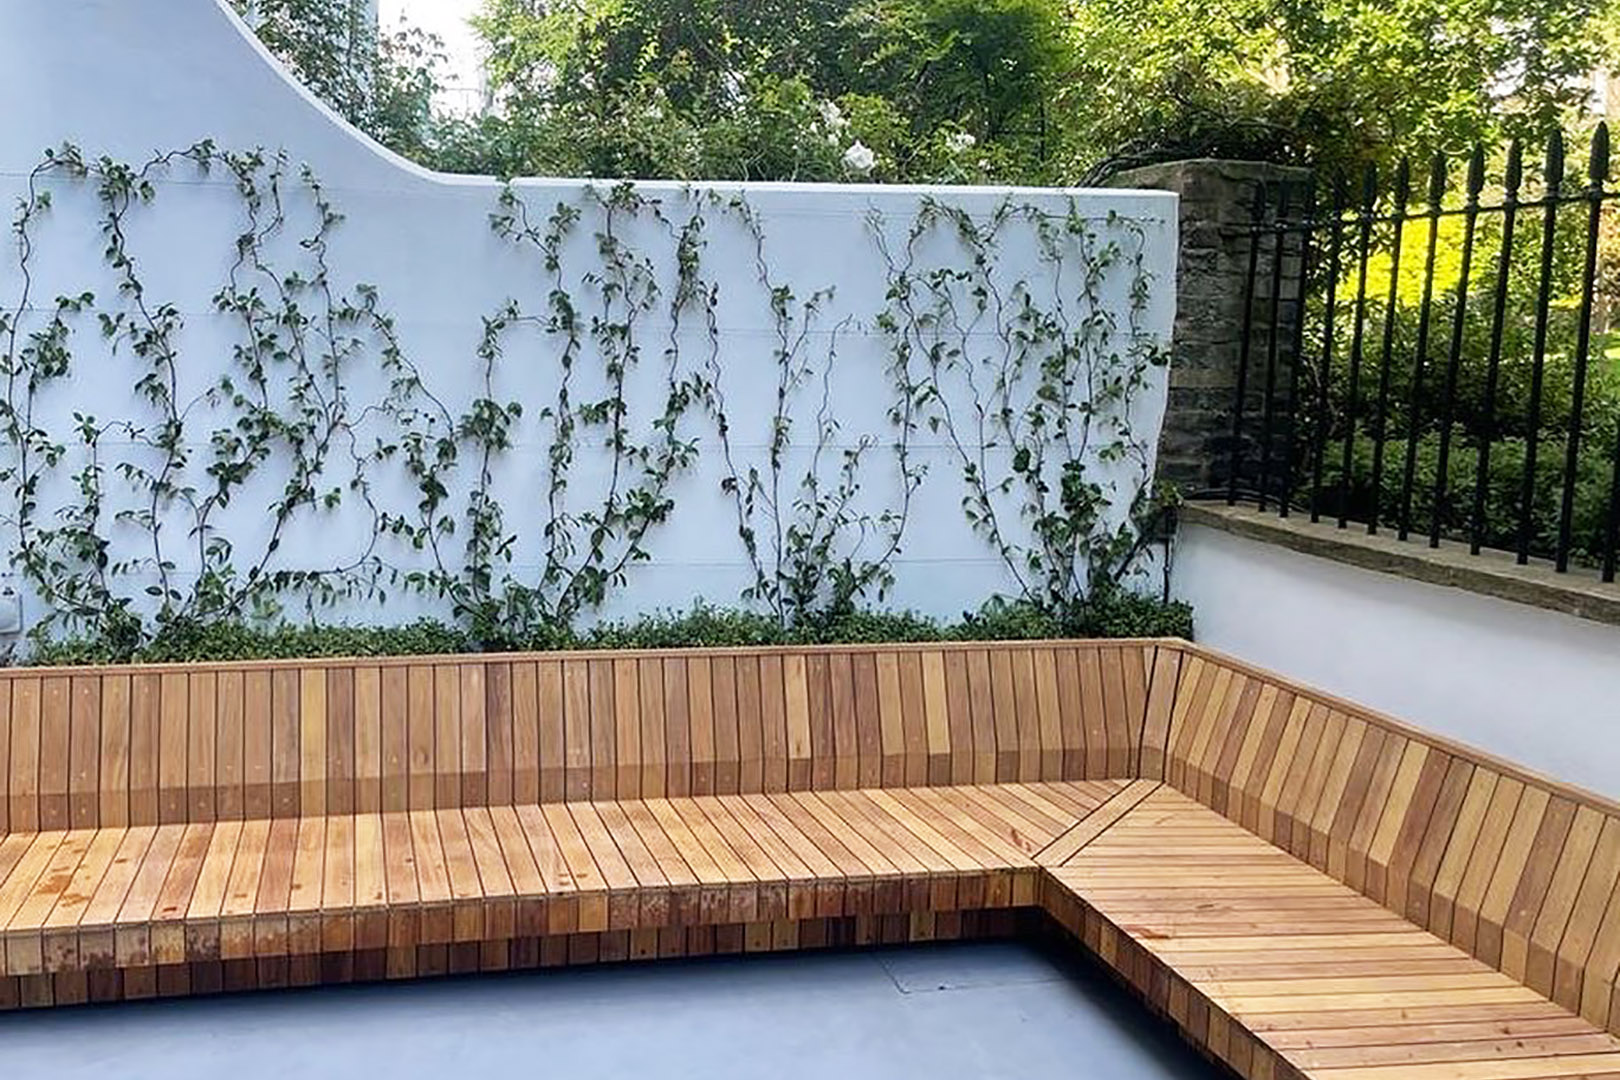 huge Iroko garden seat in a paved outdoor area with foliage growing up a white wall